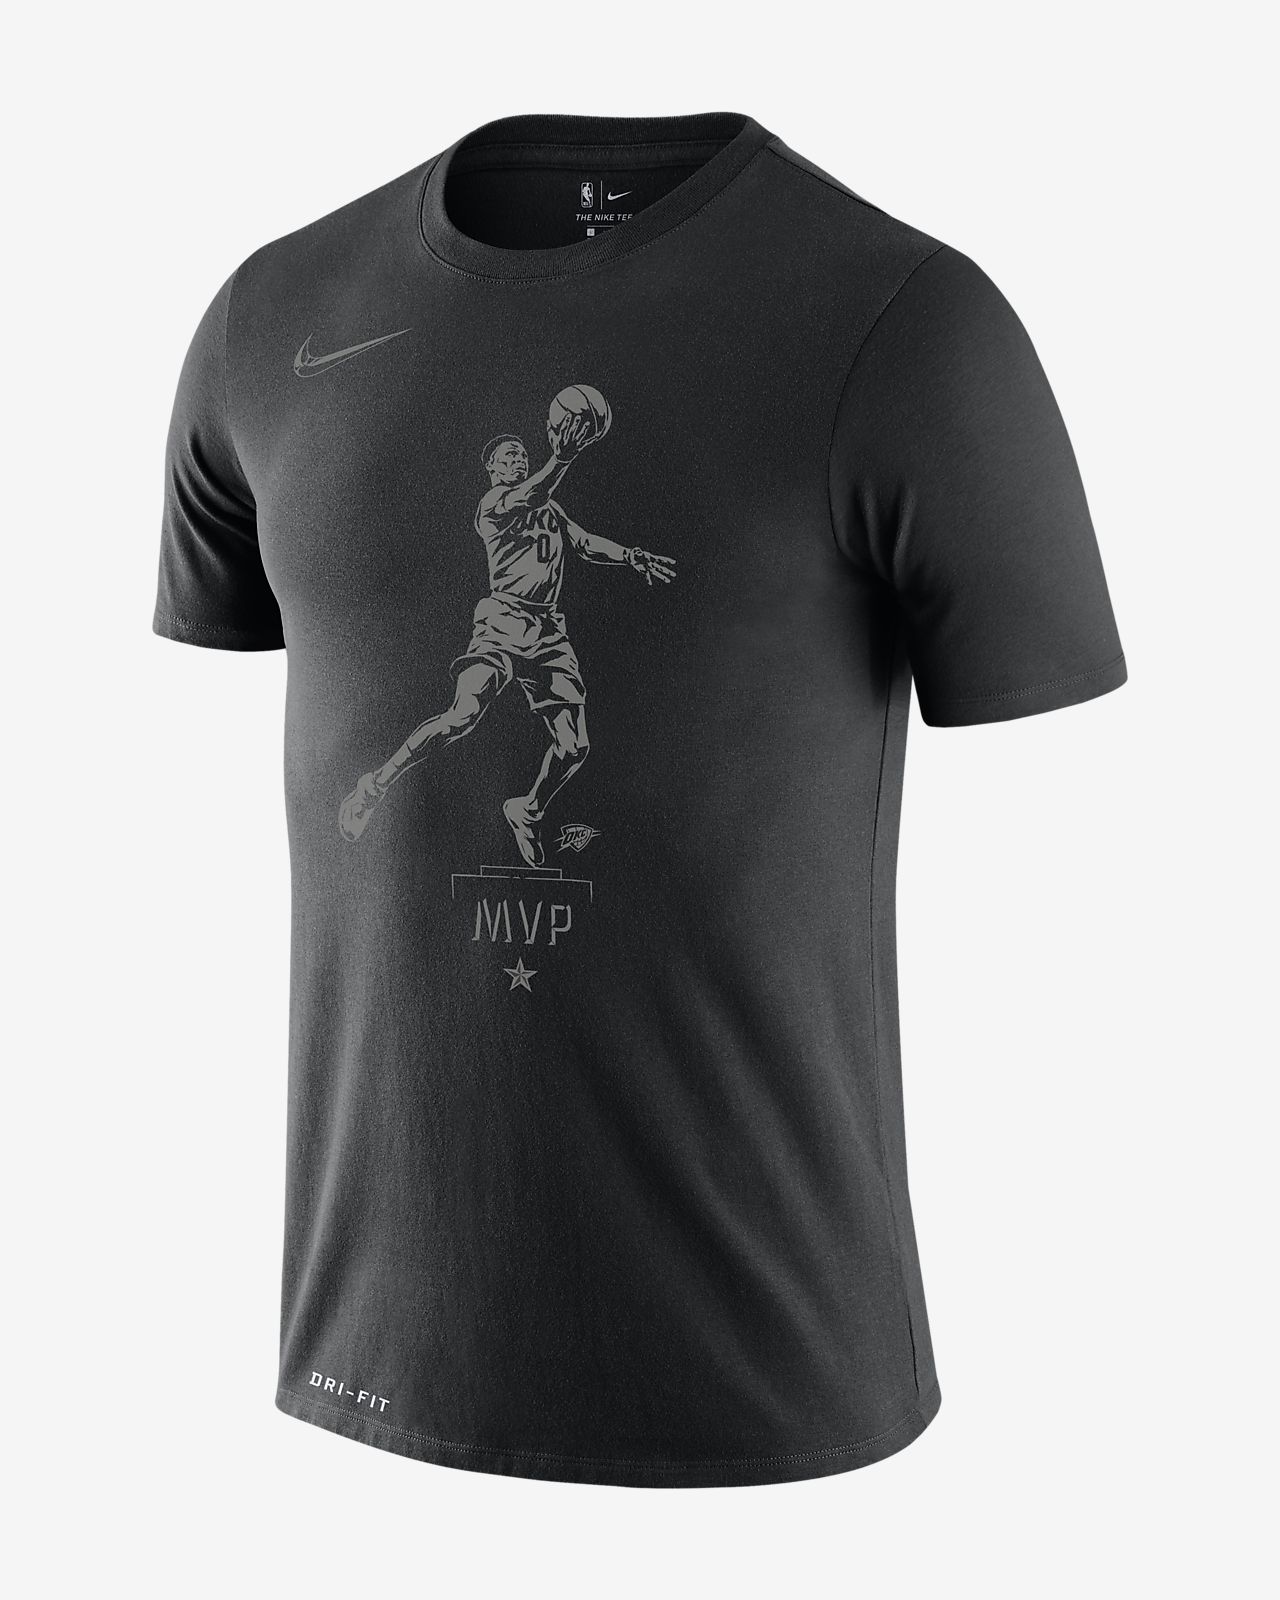 russell westbrook t shirt nike